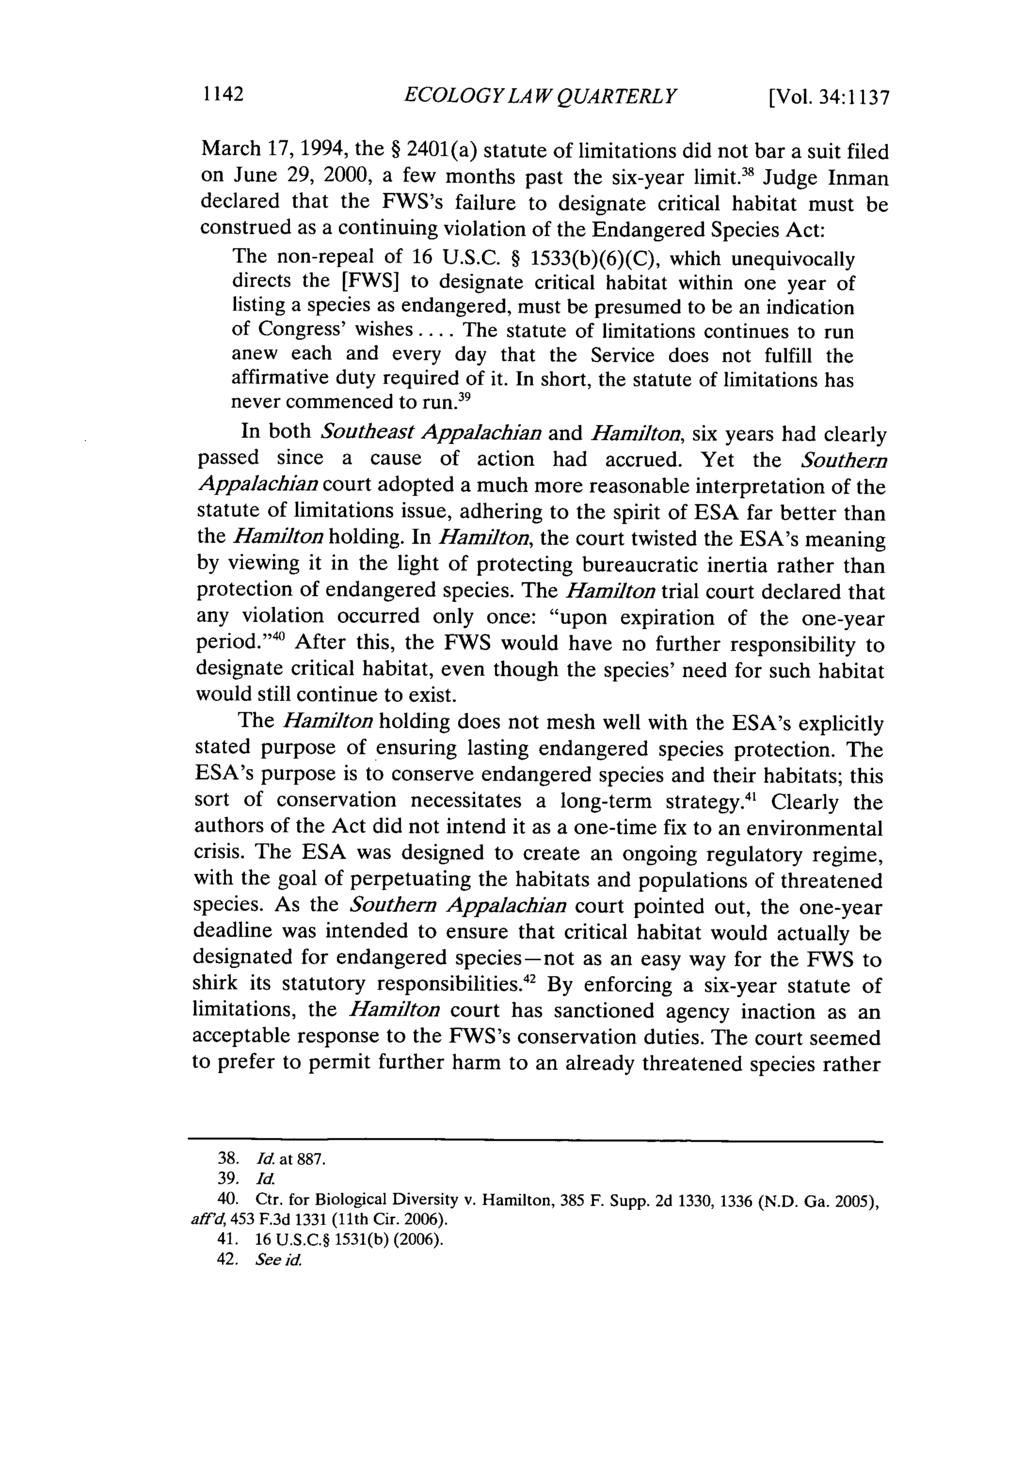 1142 ECOLOGYLA W QUARTERLY [Vol. 34:1137 March 17, 1994, the 2401(a) statute of limitations did not bar a suit filed on June 29, 2000, a few months past the six-year limit.